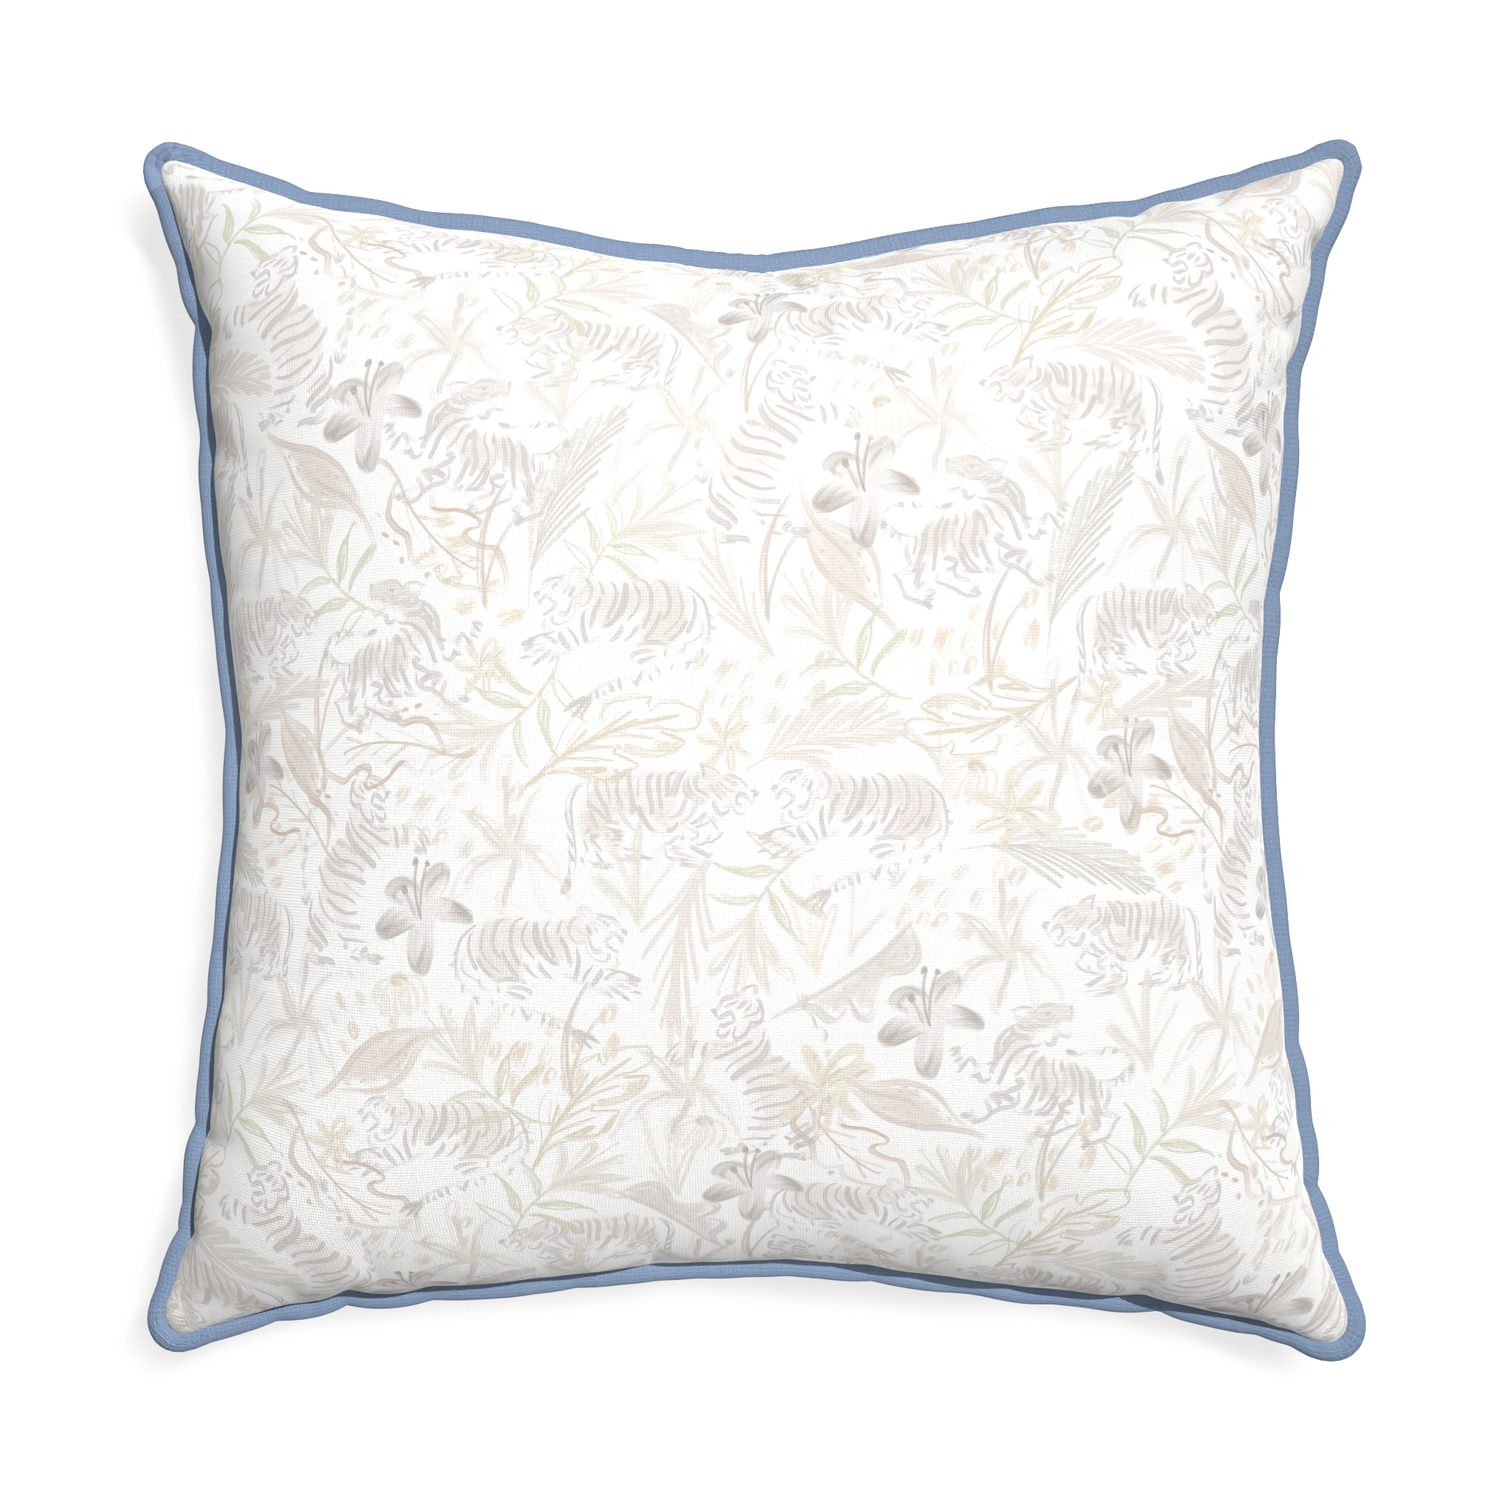 Euro-sham frida sand custom beige chinoiserie tigerpillow with sky piping on white background